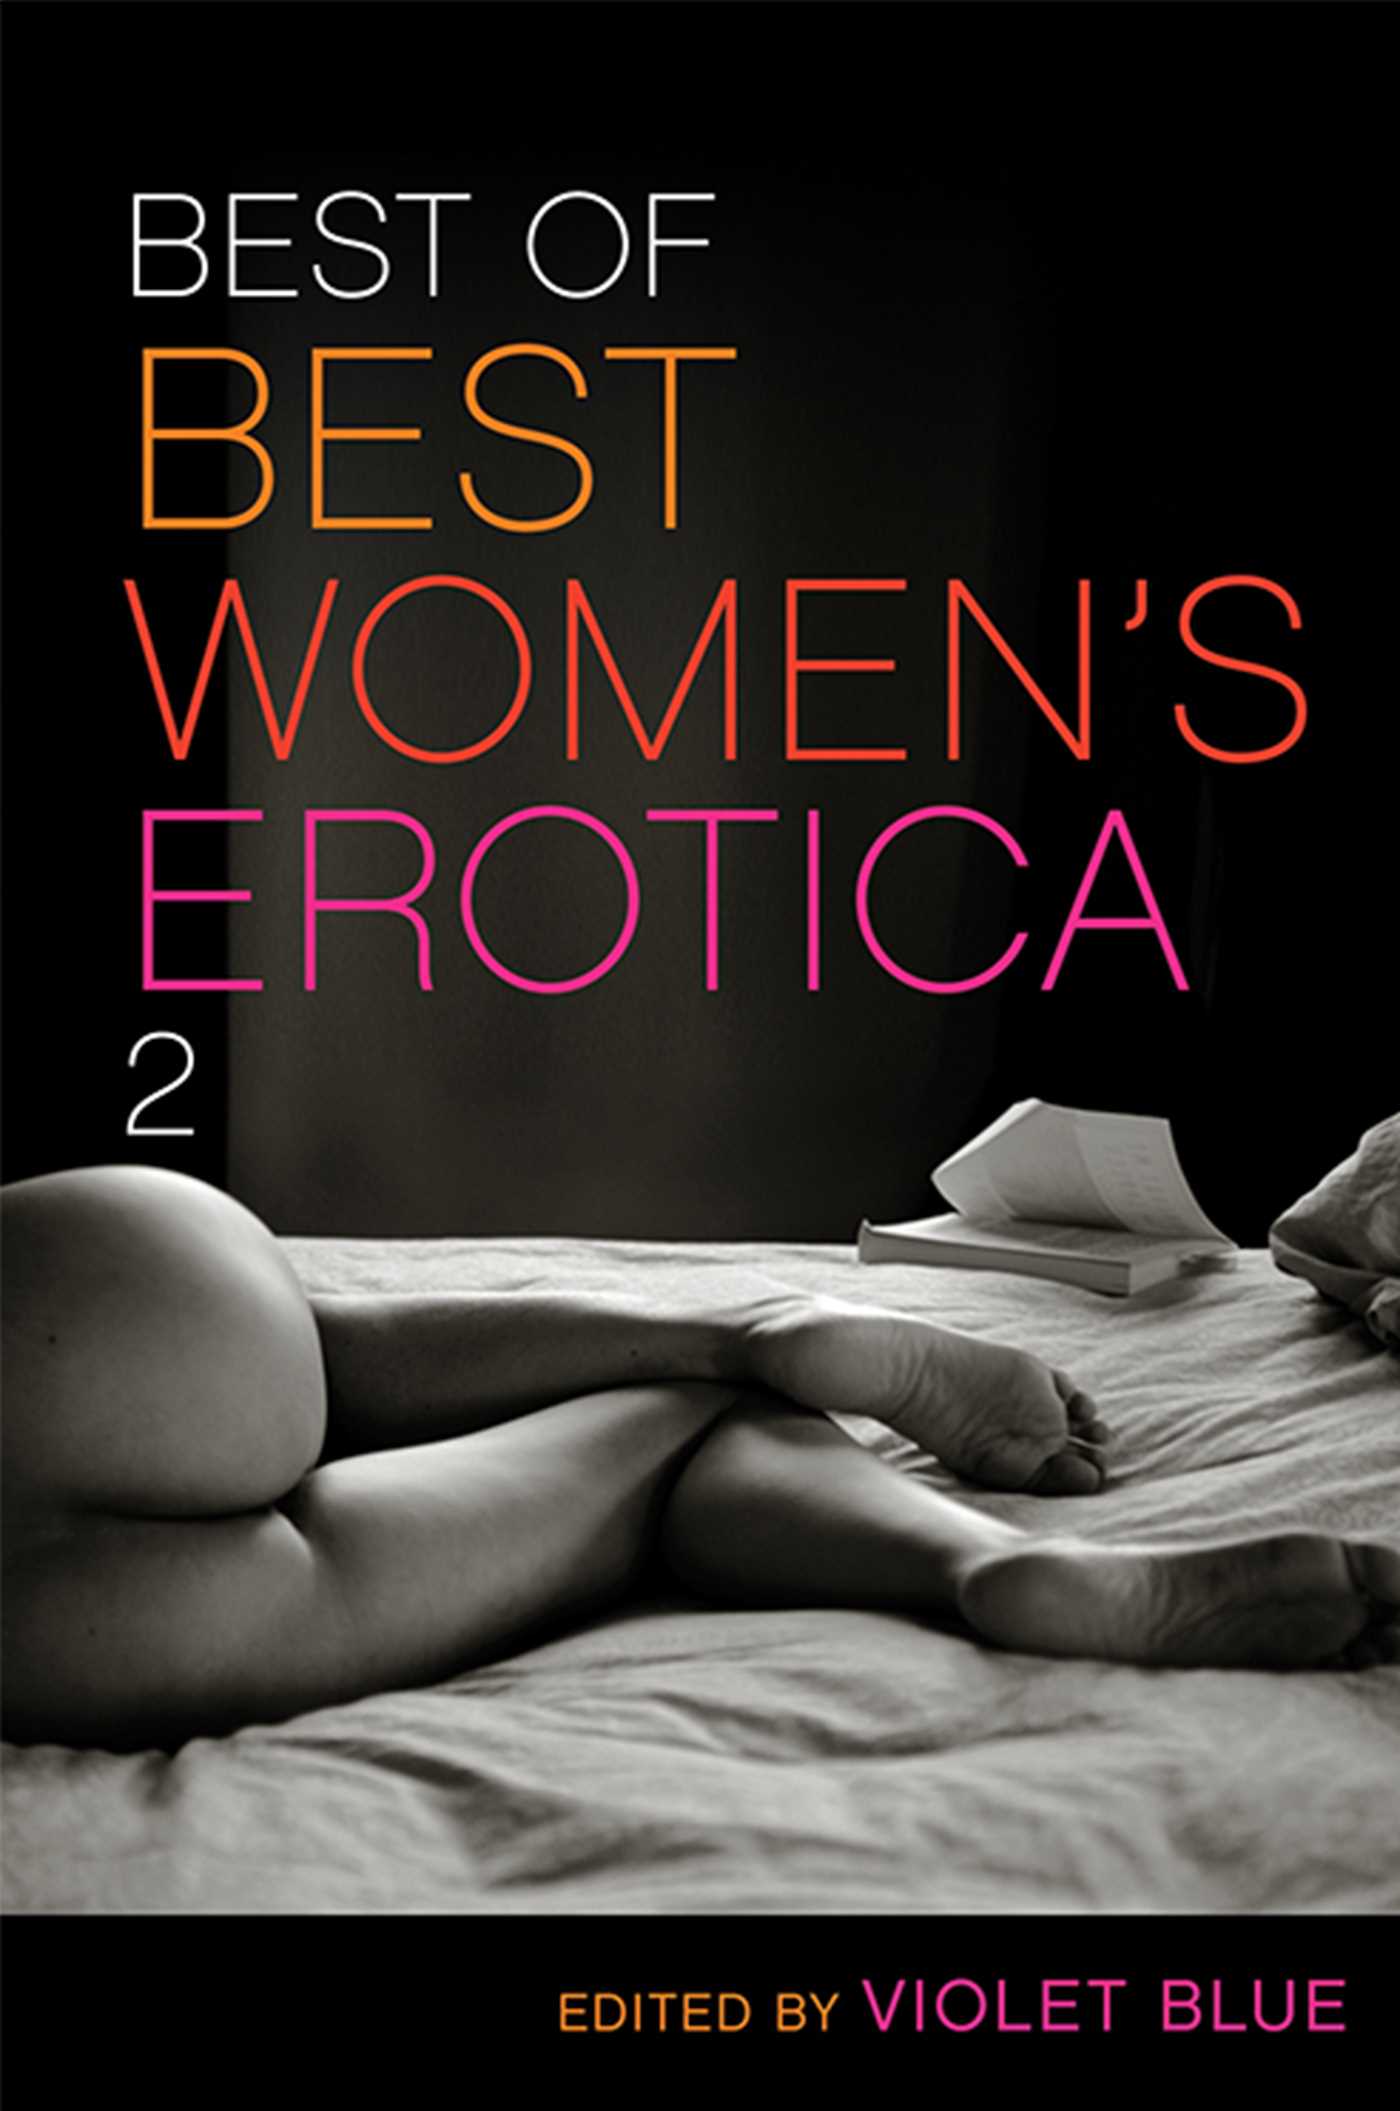 Best of Best Women's Erotica 2 | Book by Violet Blue | Official ...